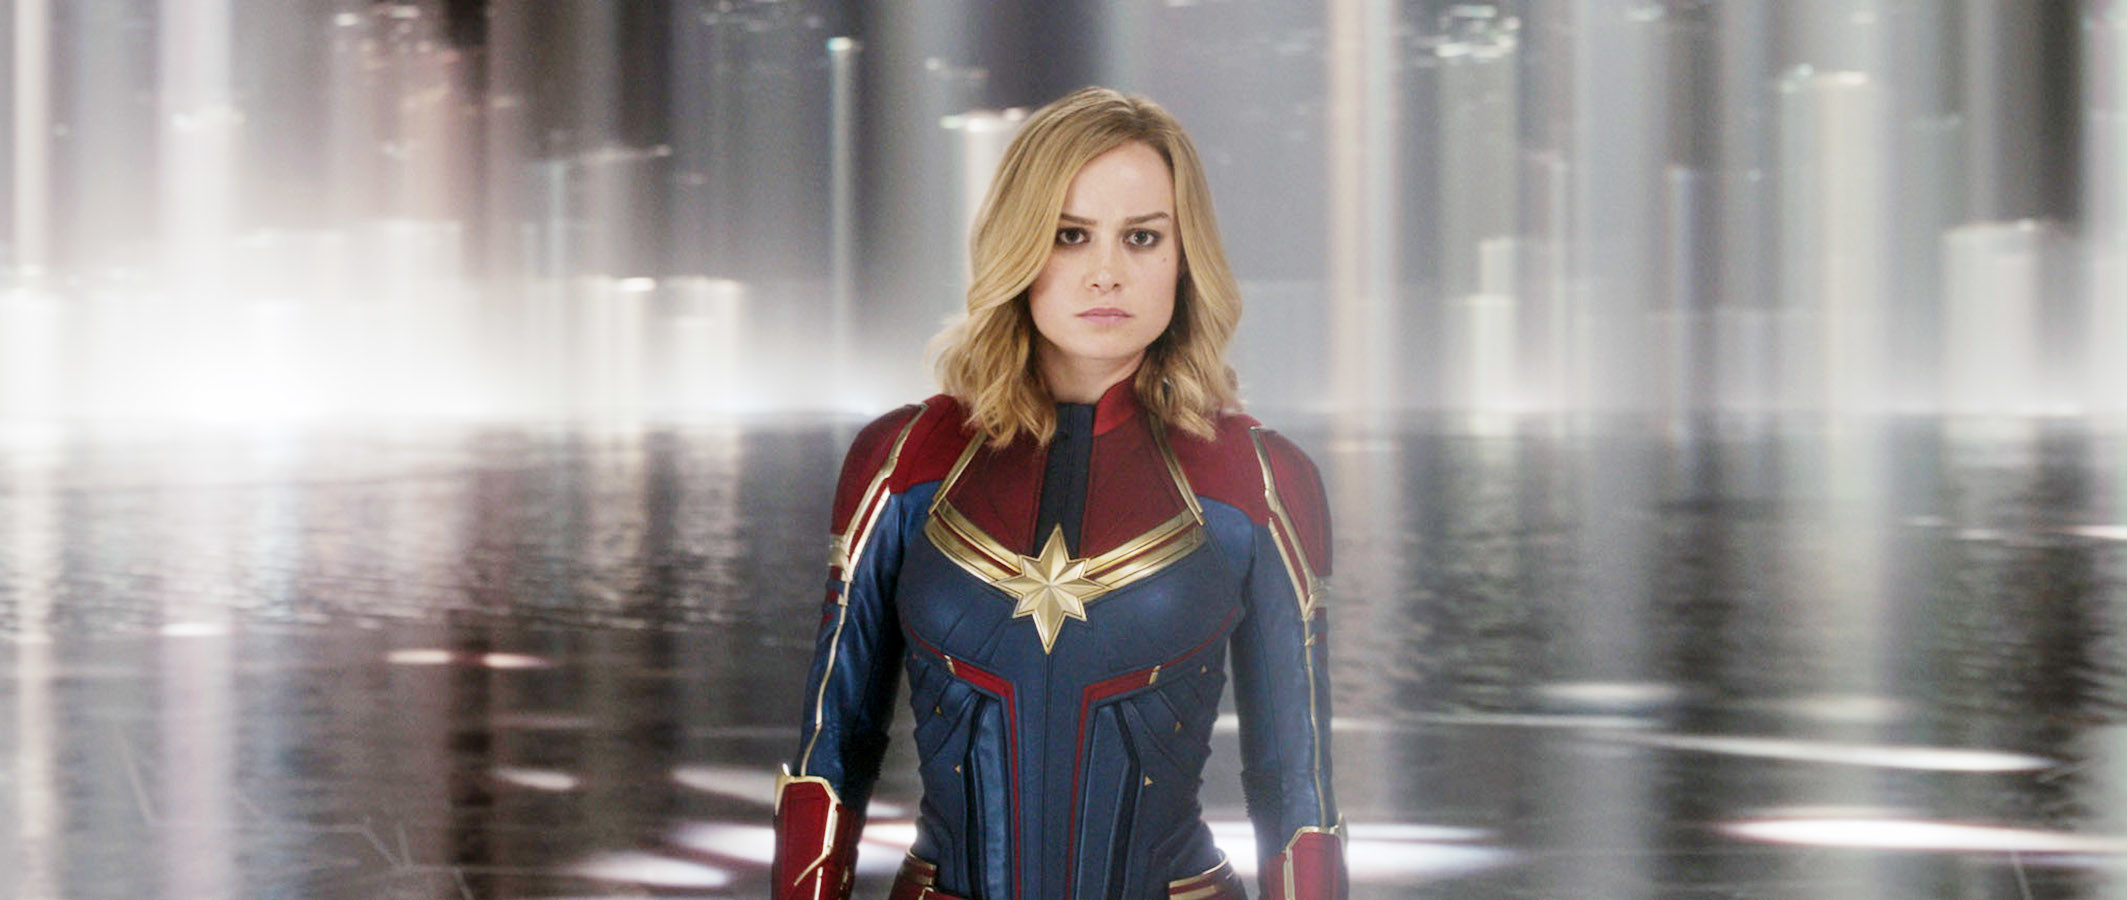 Brie Larson in her Captain Marvel outfit